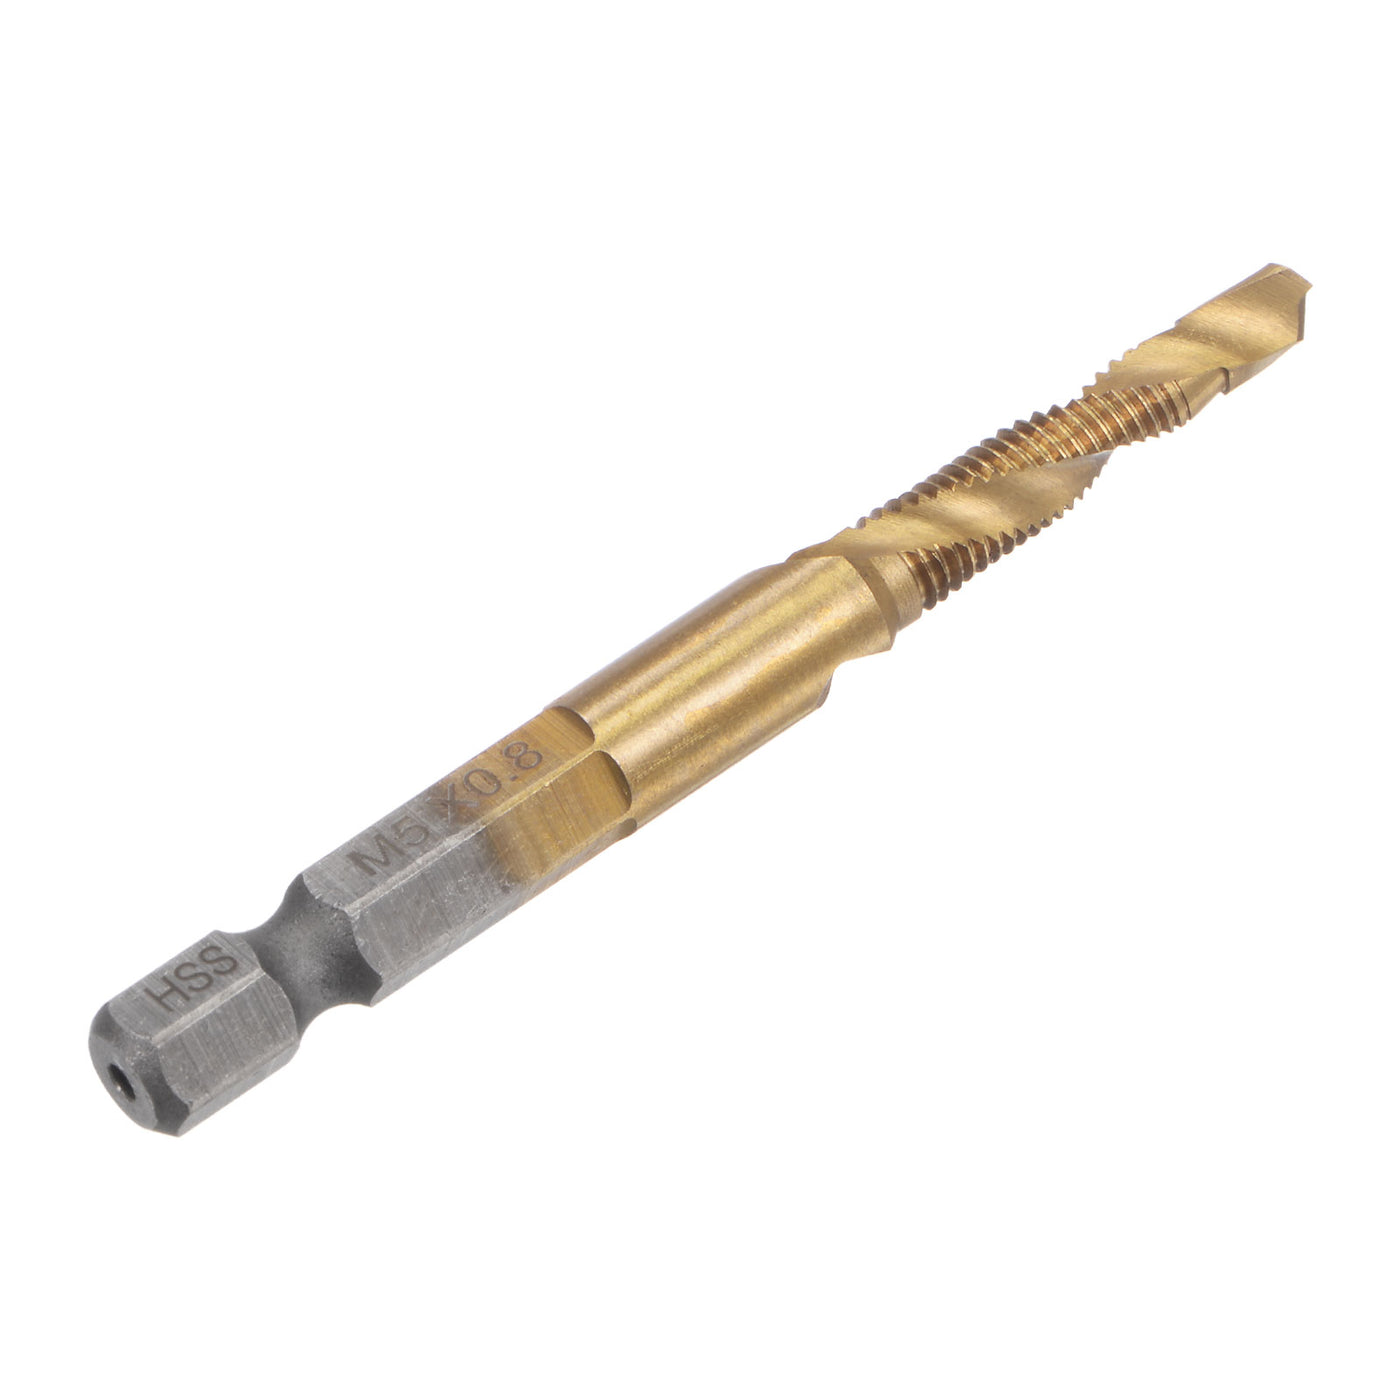 Uxcell Uxcell M5x0.8 Titanium Coated High Speed Steel Combination Drill and Tap Bit Long 2pcs